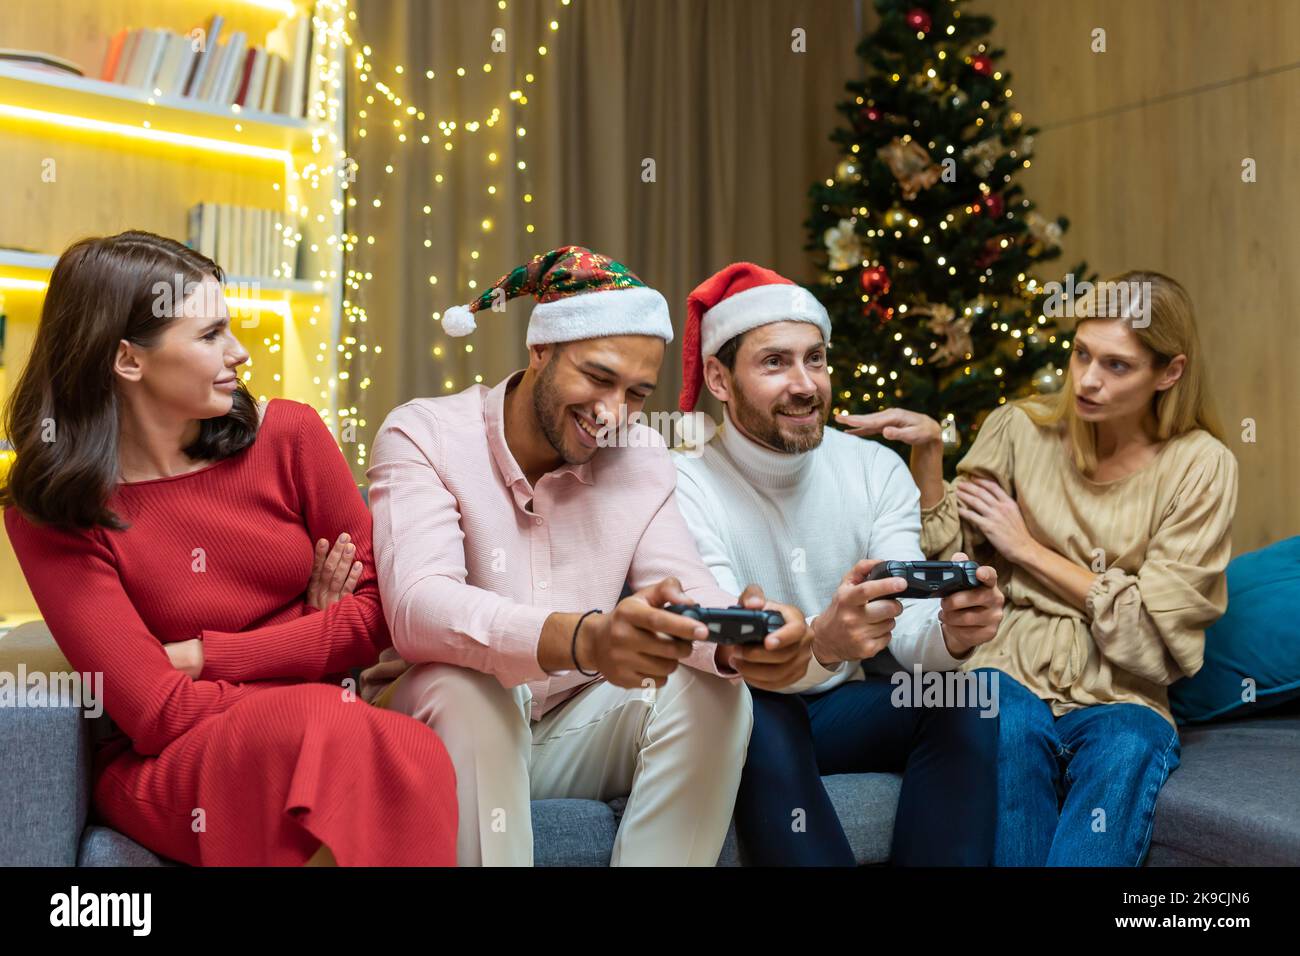 New Year's party group of four diverse friends having fun relaxing and celebrating on Christmas holidays, guests sitting on sofa men and women playing video games on joystick consoles. Stock Photo